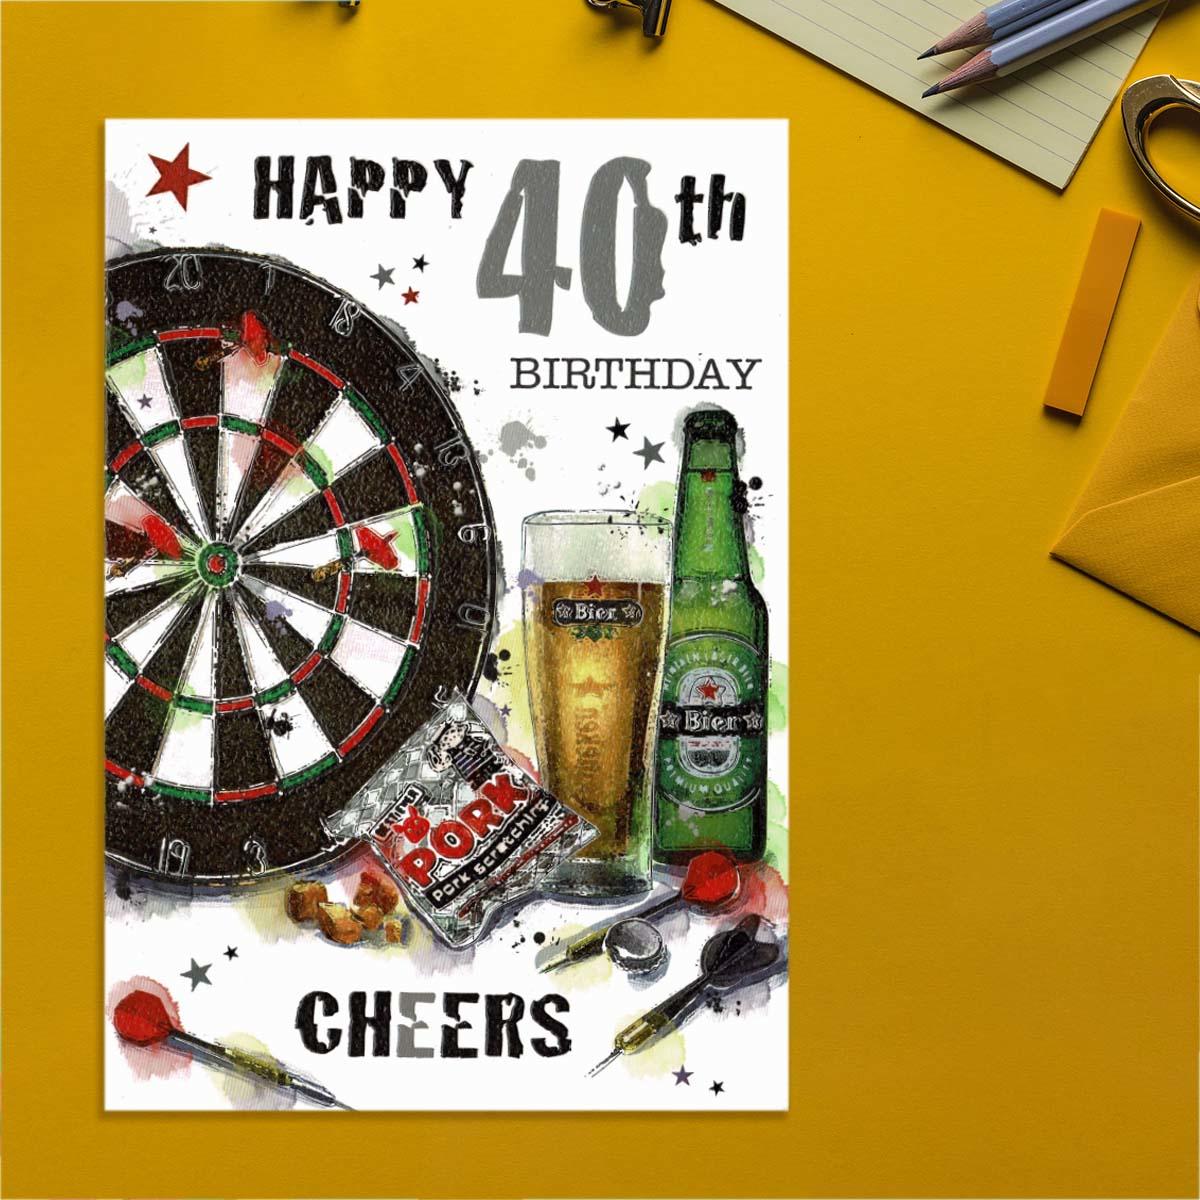 Graffix - 40th Birthday Cheers Card Front Image